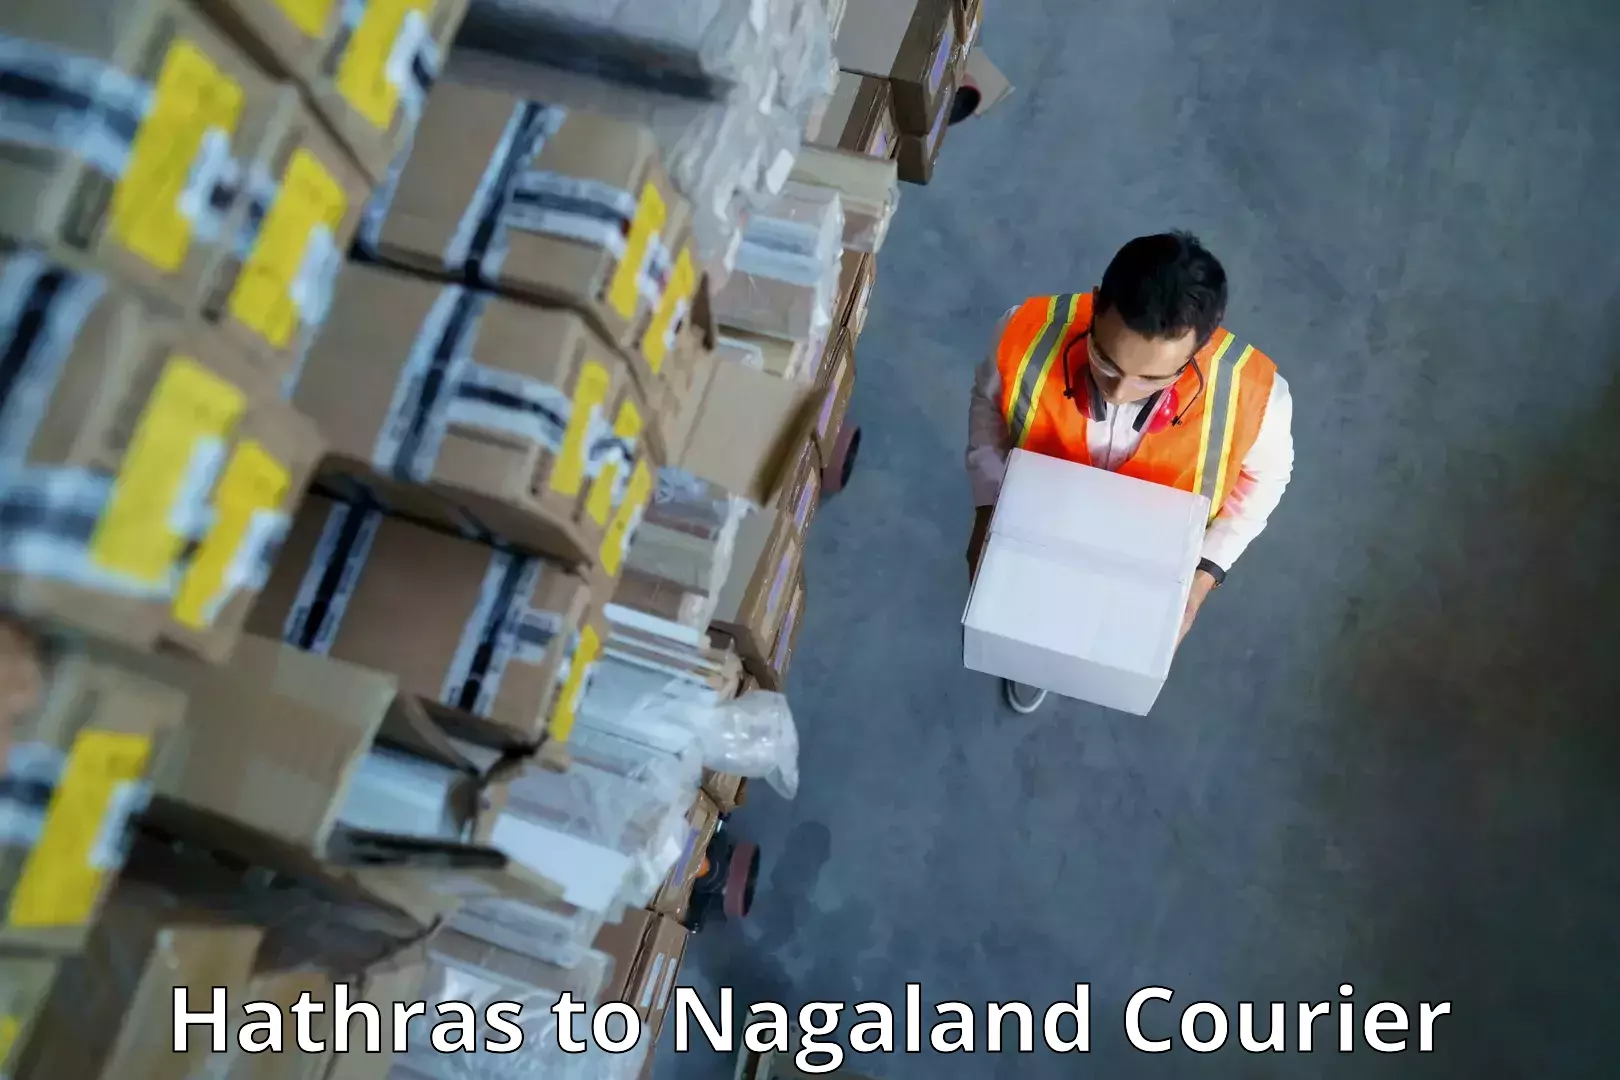 Next-day freight services Hathras to Nagaland